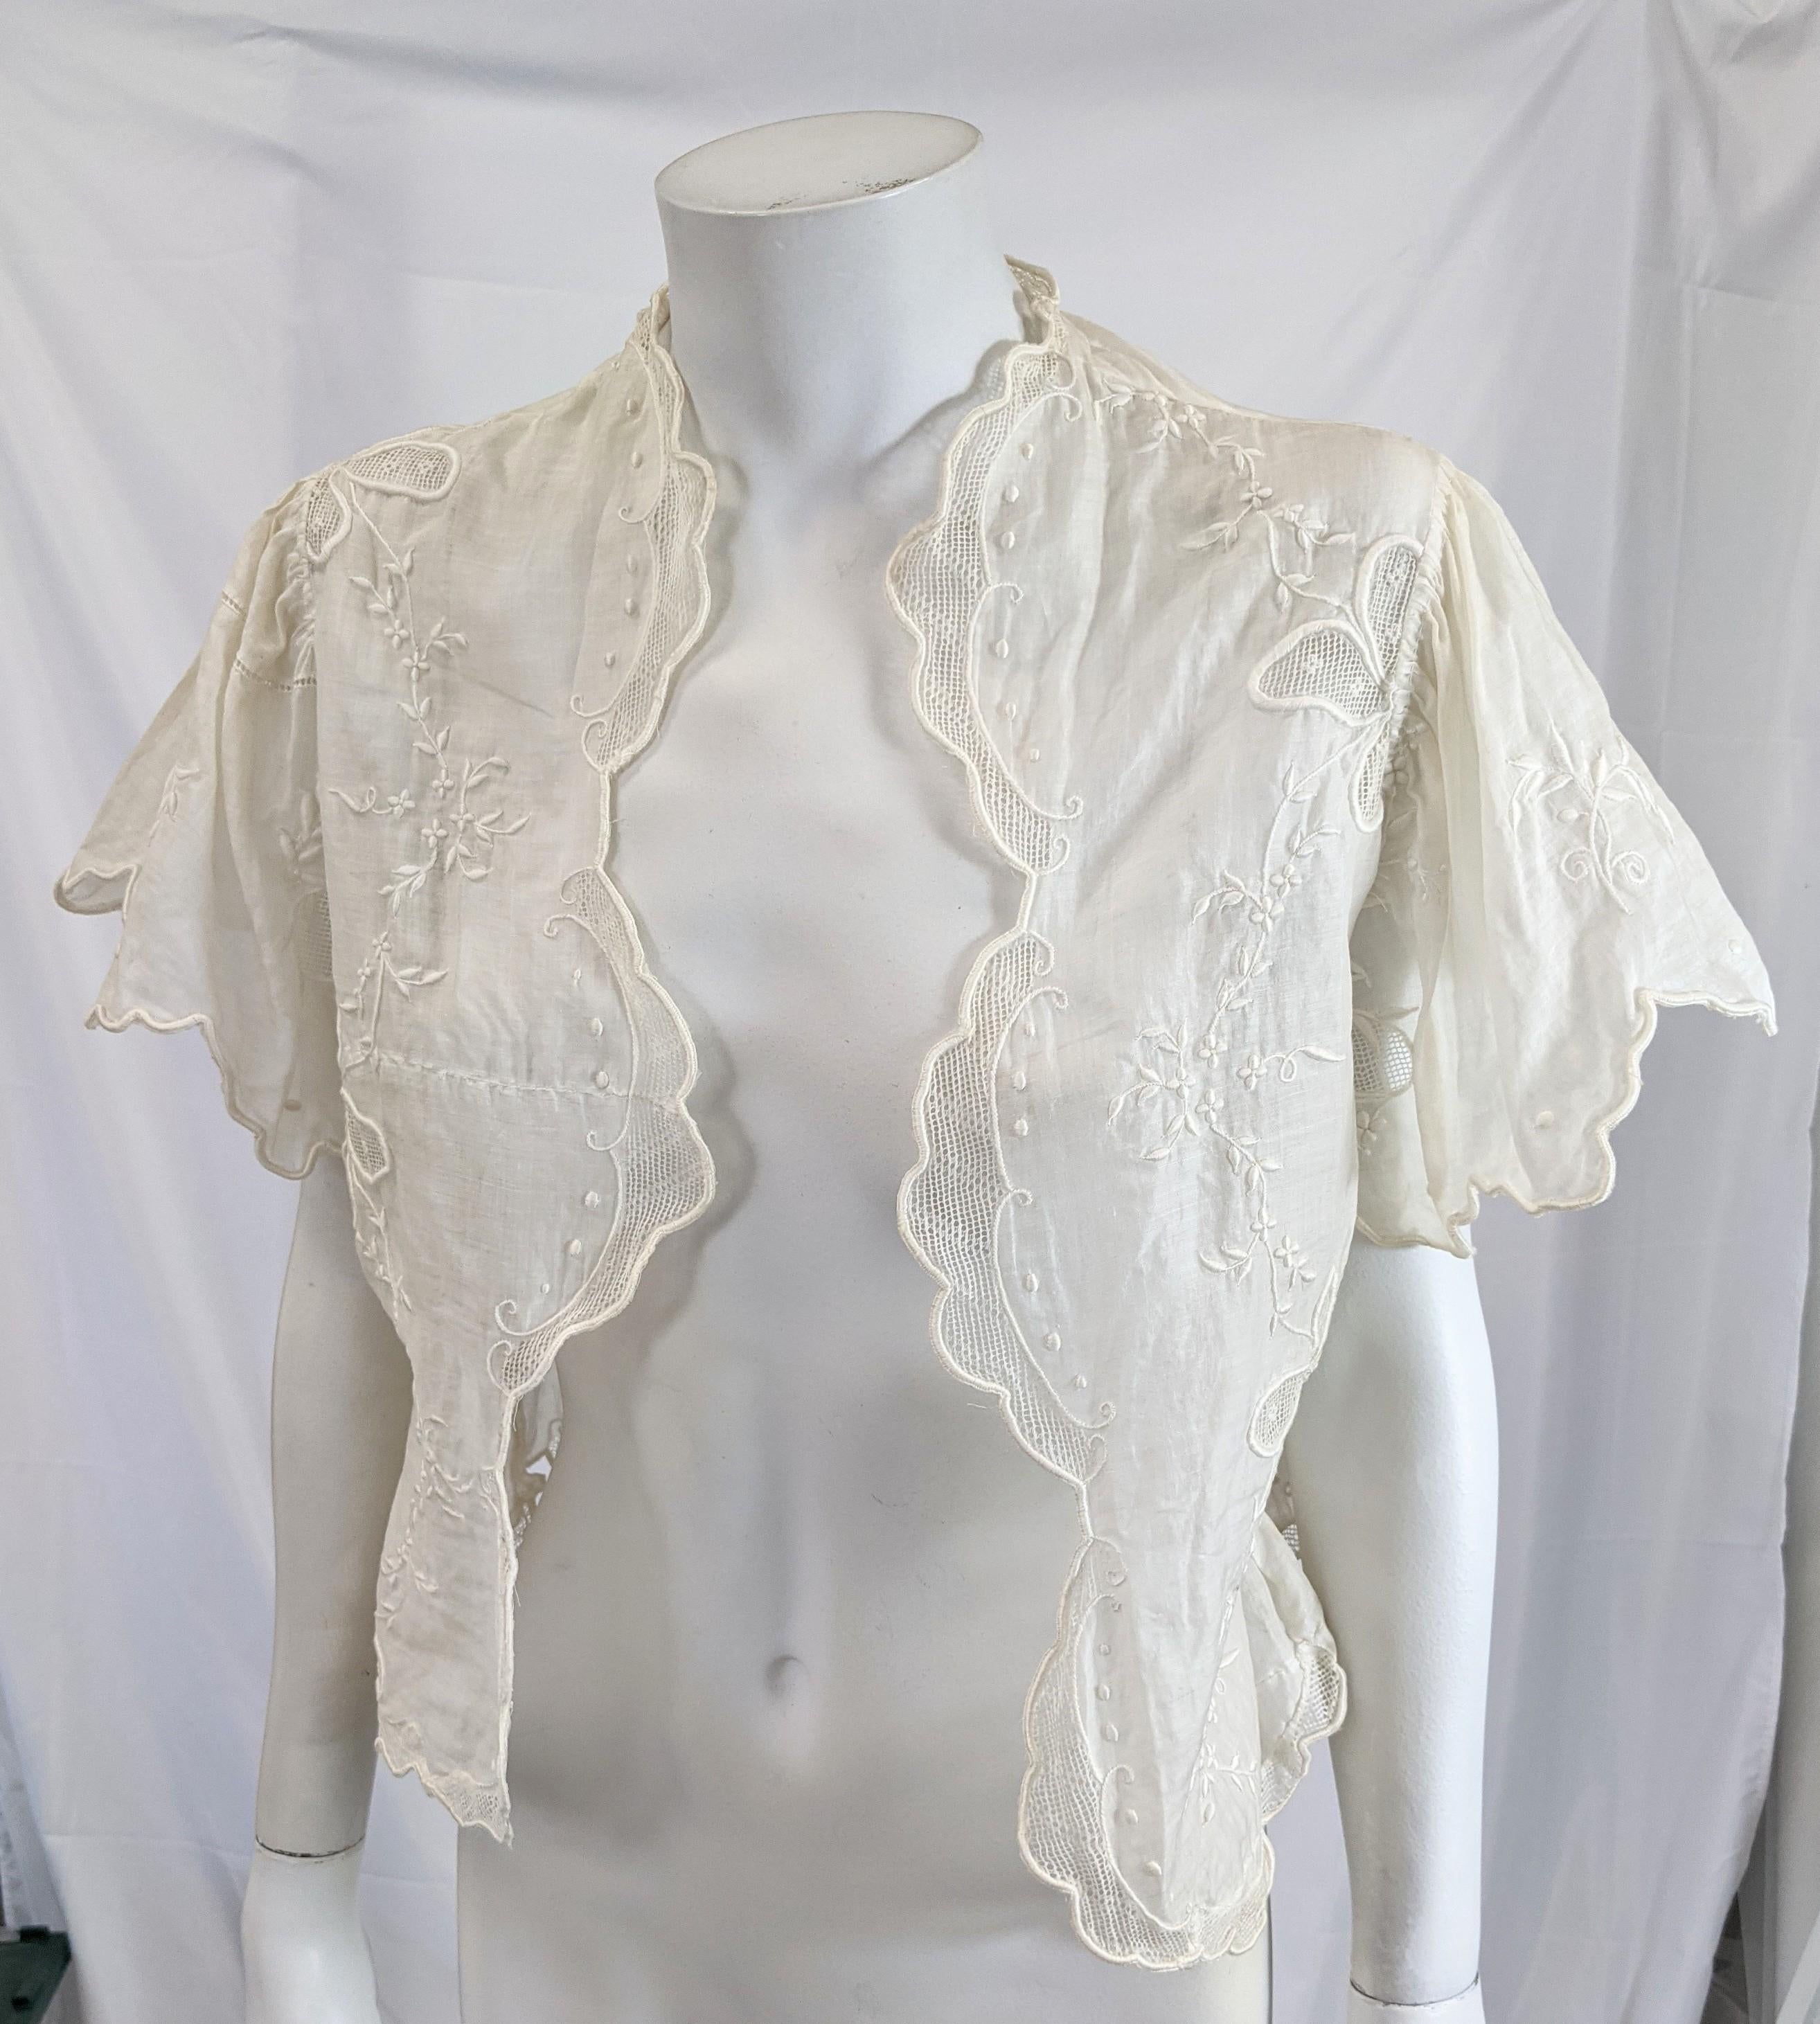 Edwardian Batiste Embroidered Bolero with flutter sleeves, with embroidery and openwork clover motifs. Made possibly from an older piece with unusual seaming.
Cotton Batiste 19